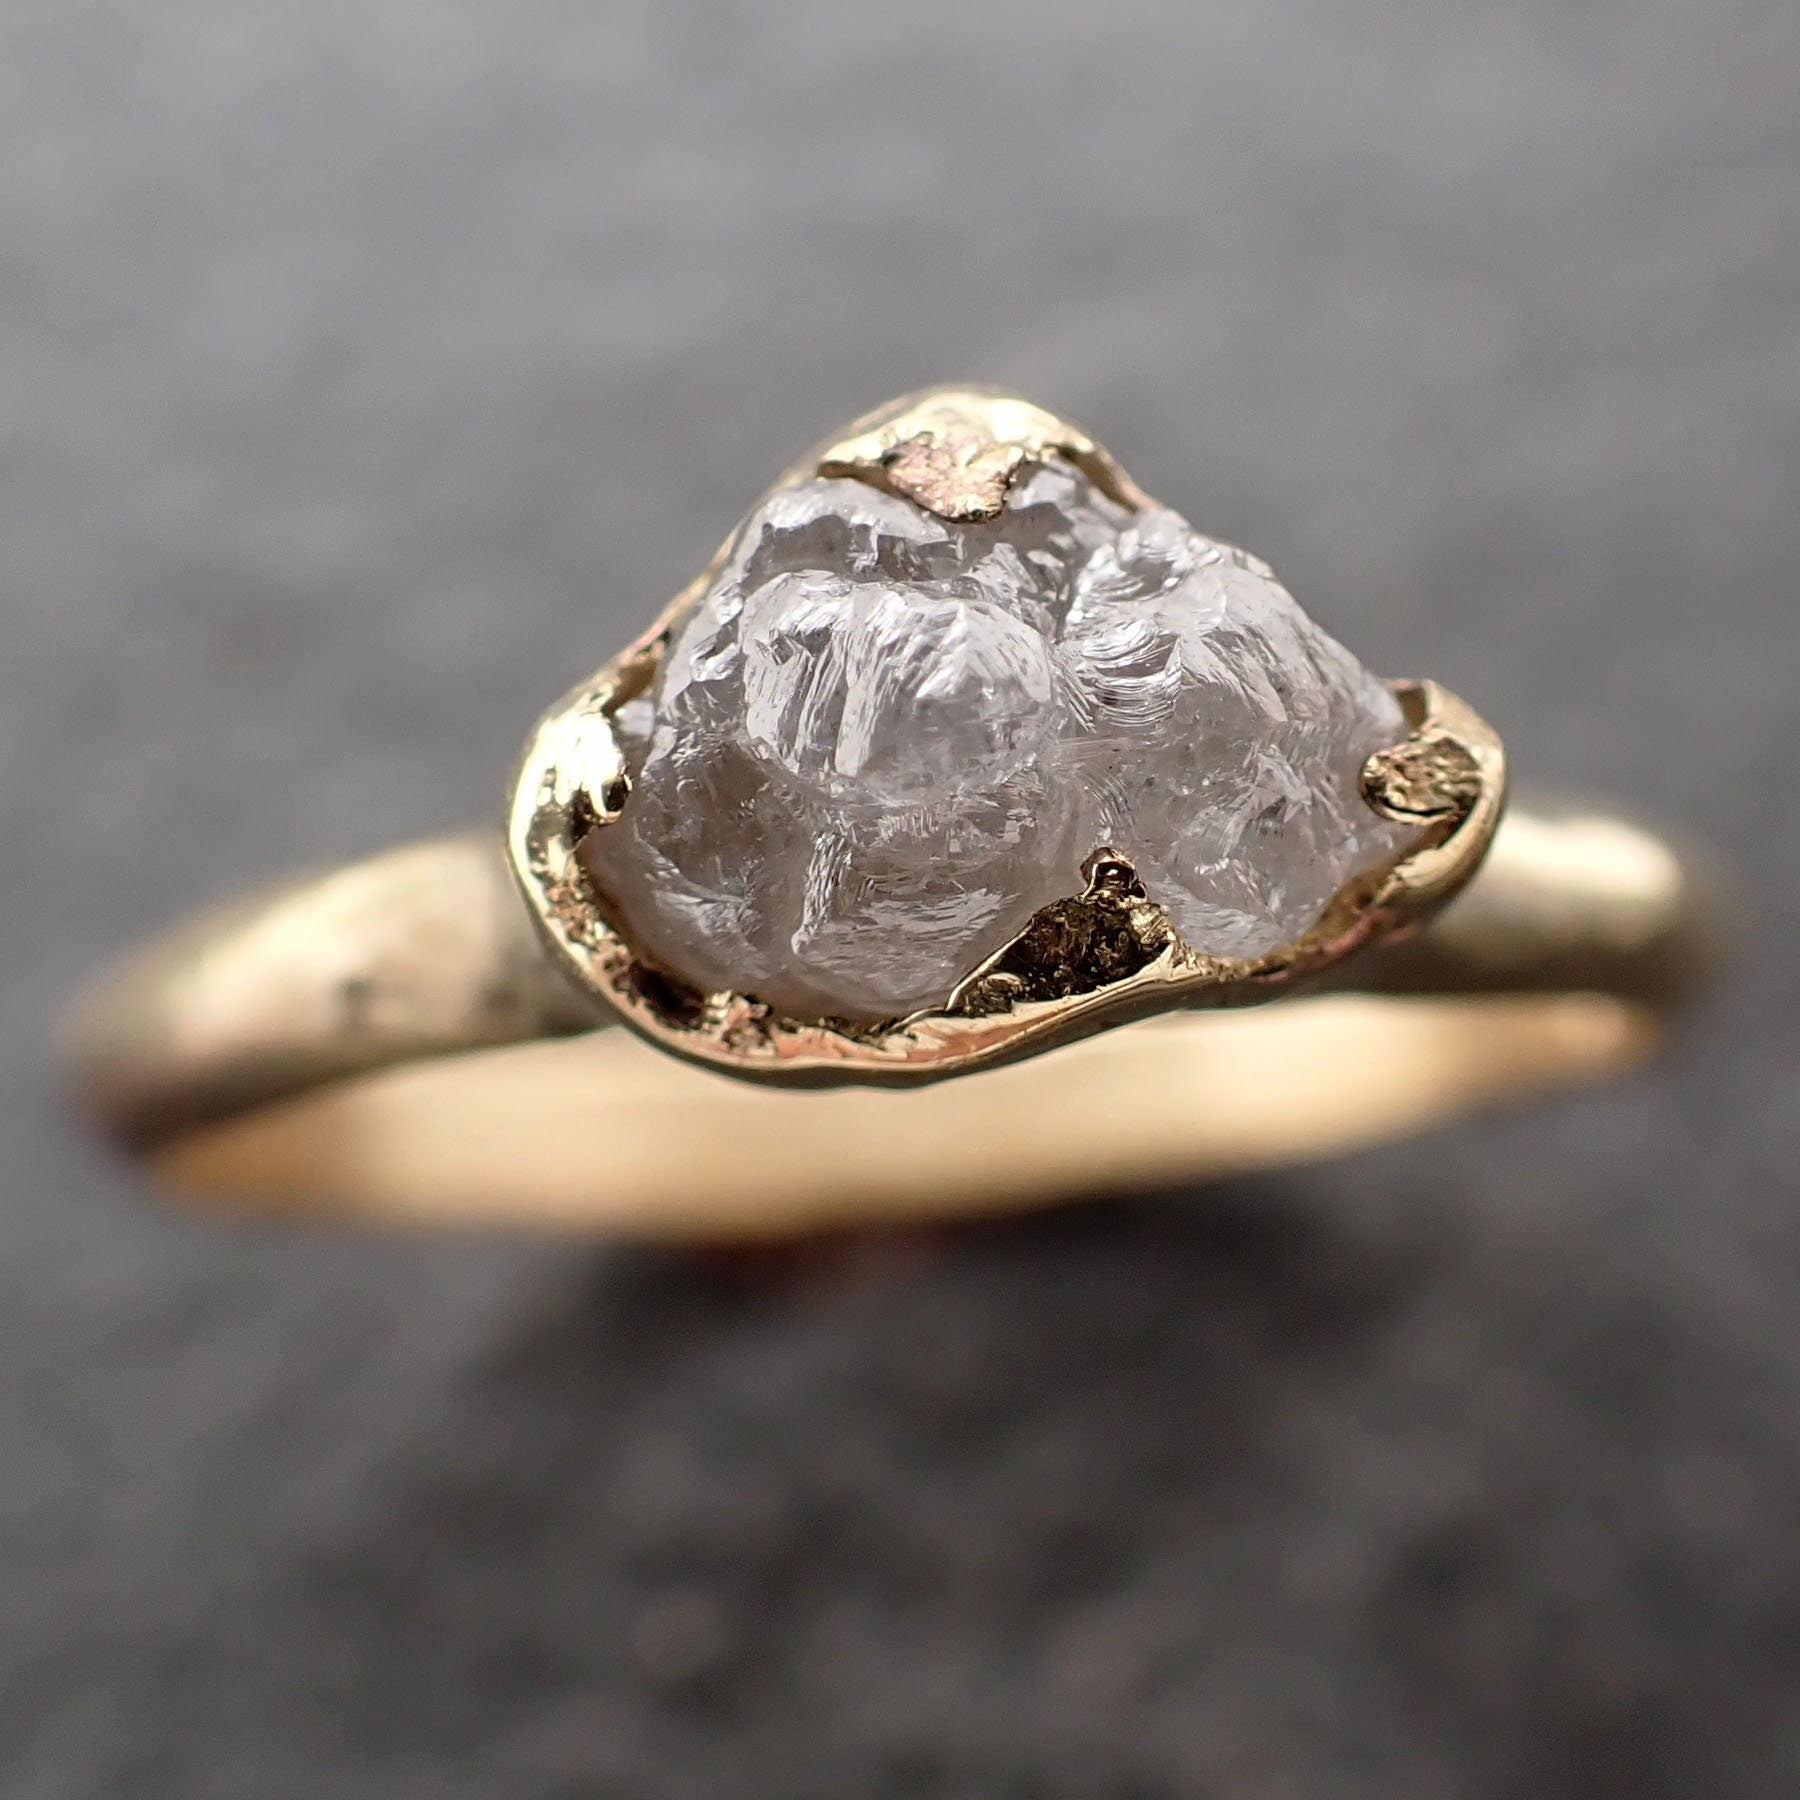 Raw Diamond Engagement Ring Rough Uncut Diamond Solitaire Recycled 14k yellow gold Conflict Free Diamond Wedding Promise 3117